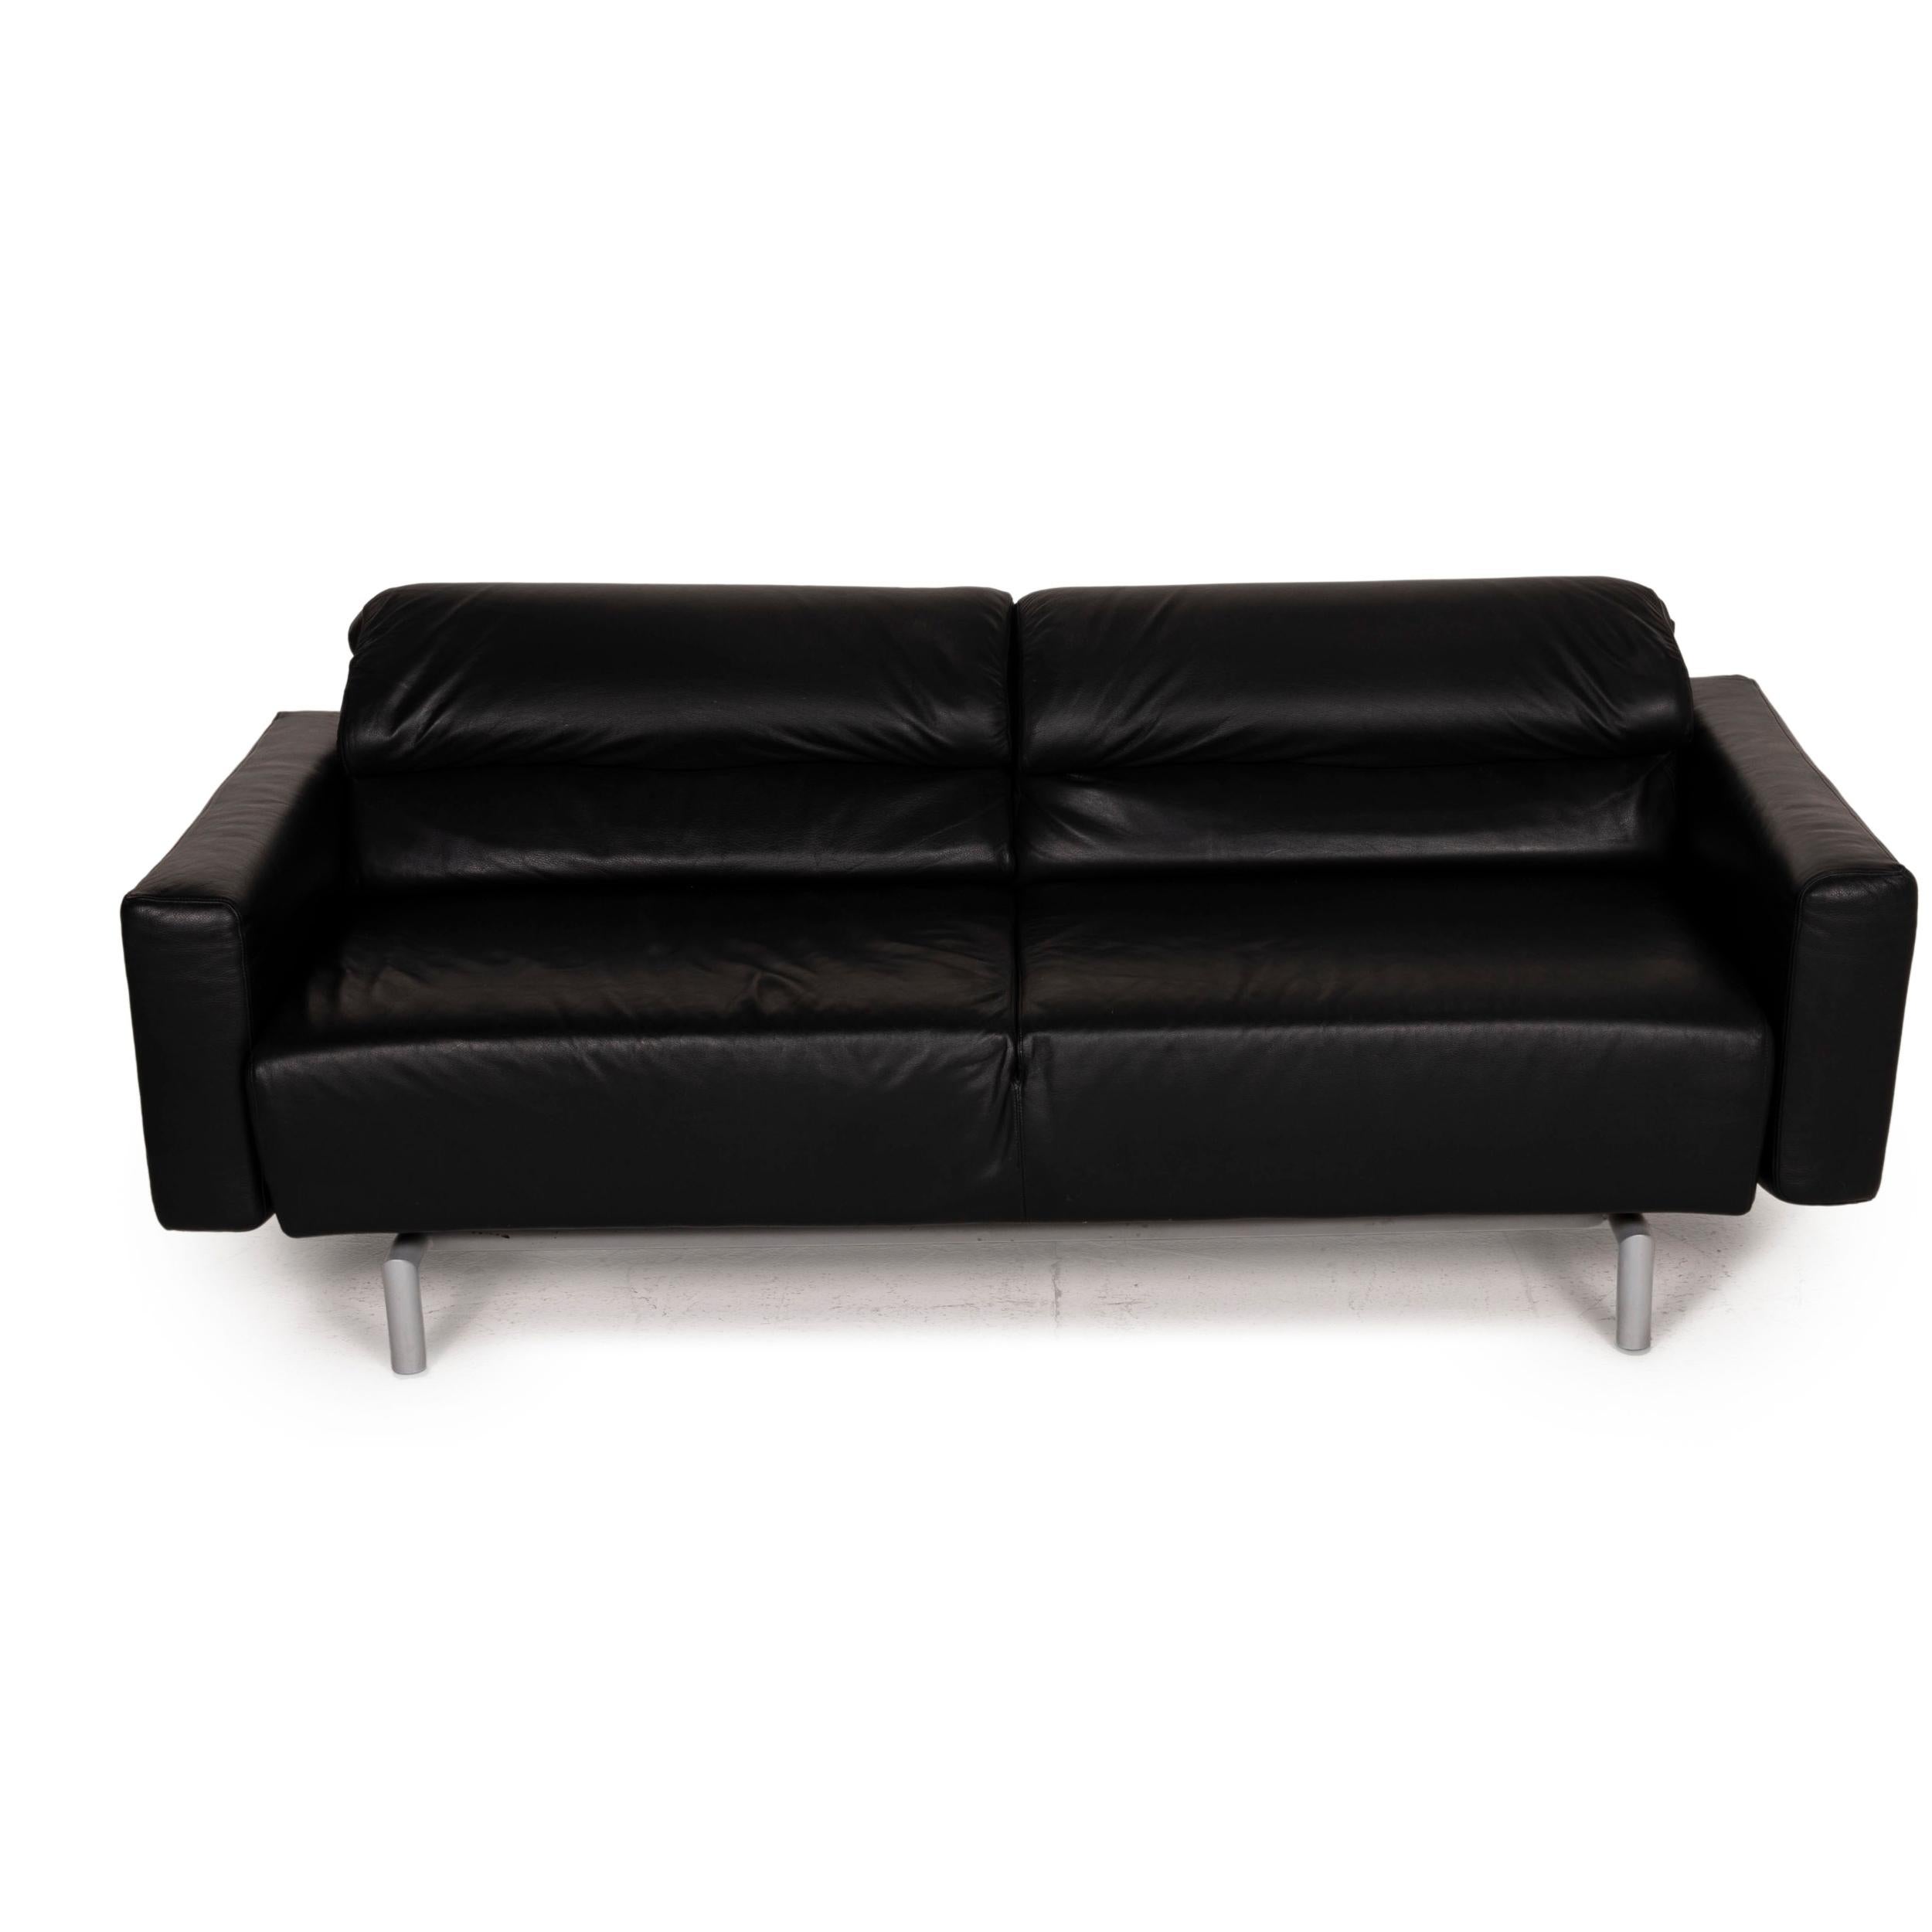 Strässle Matteo Leather Sofa Black Two-Seater Function Relax Function Couch 2